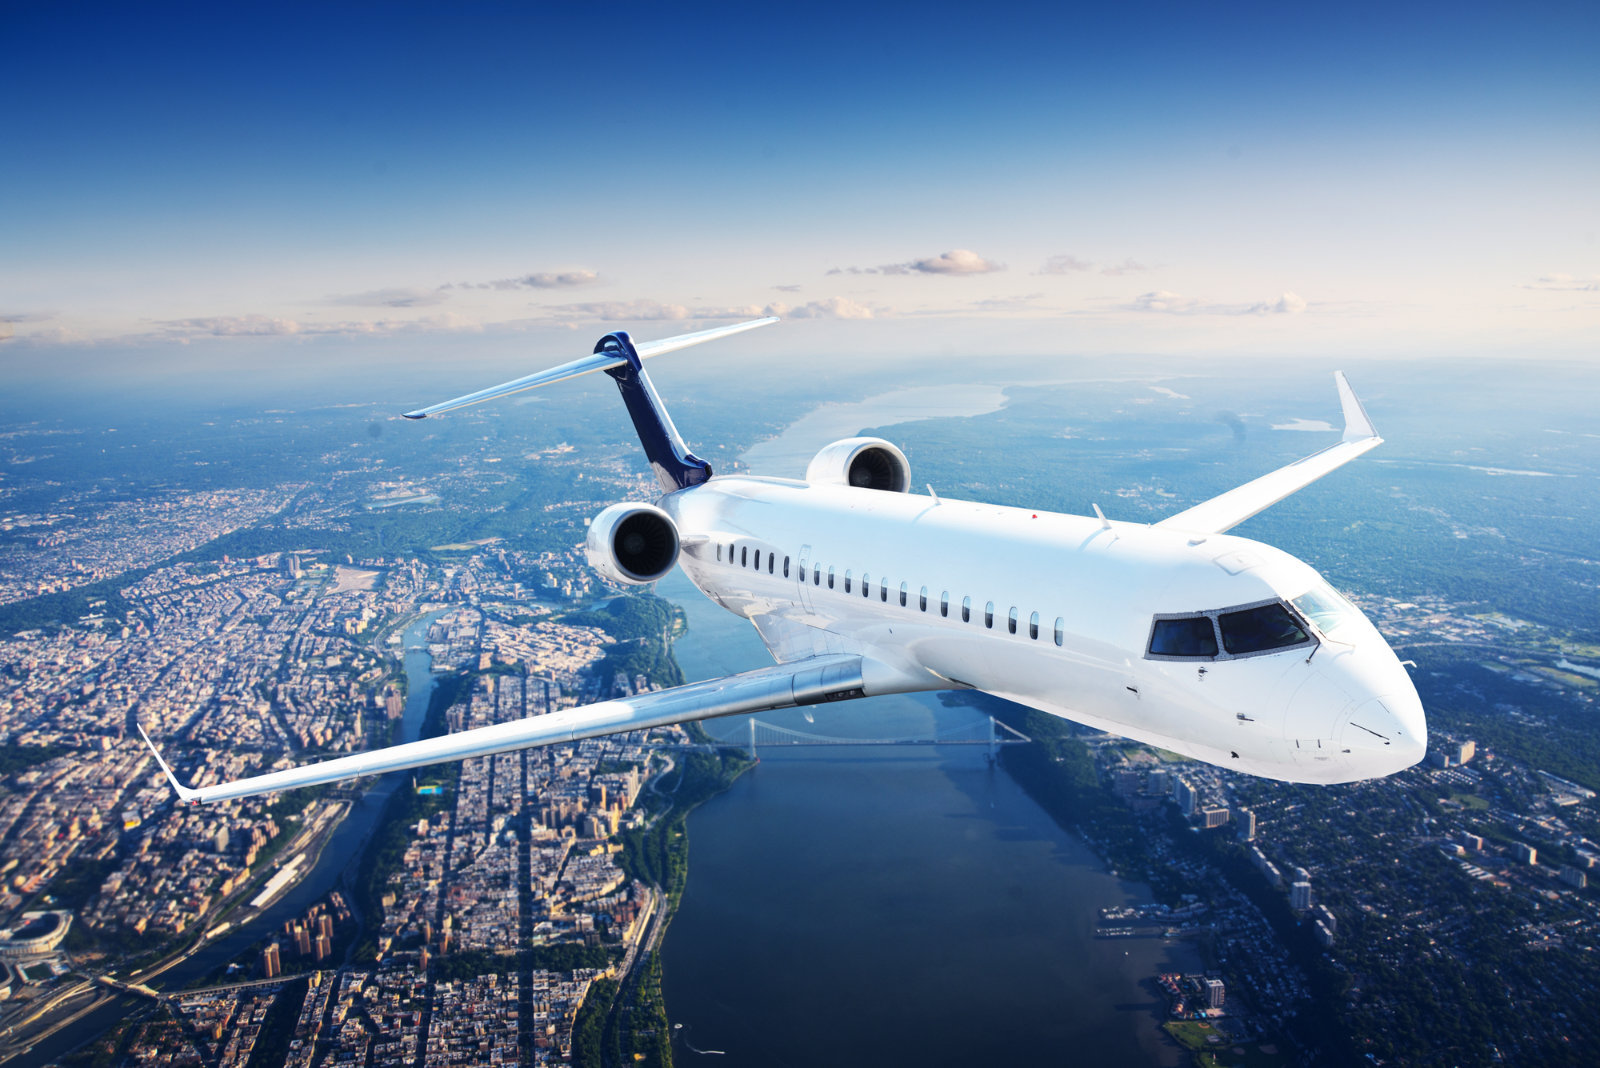 What Types of Companies Use Aircraft Charters?